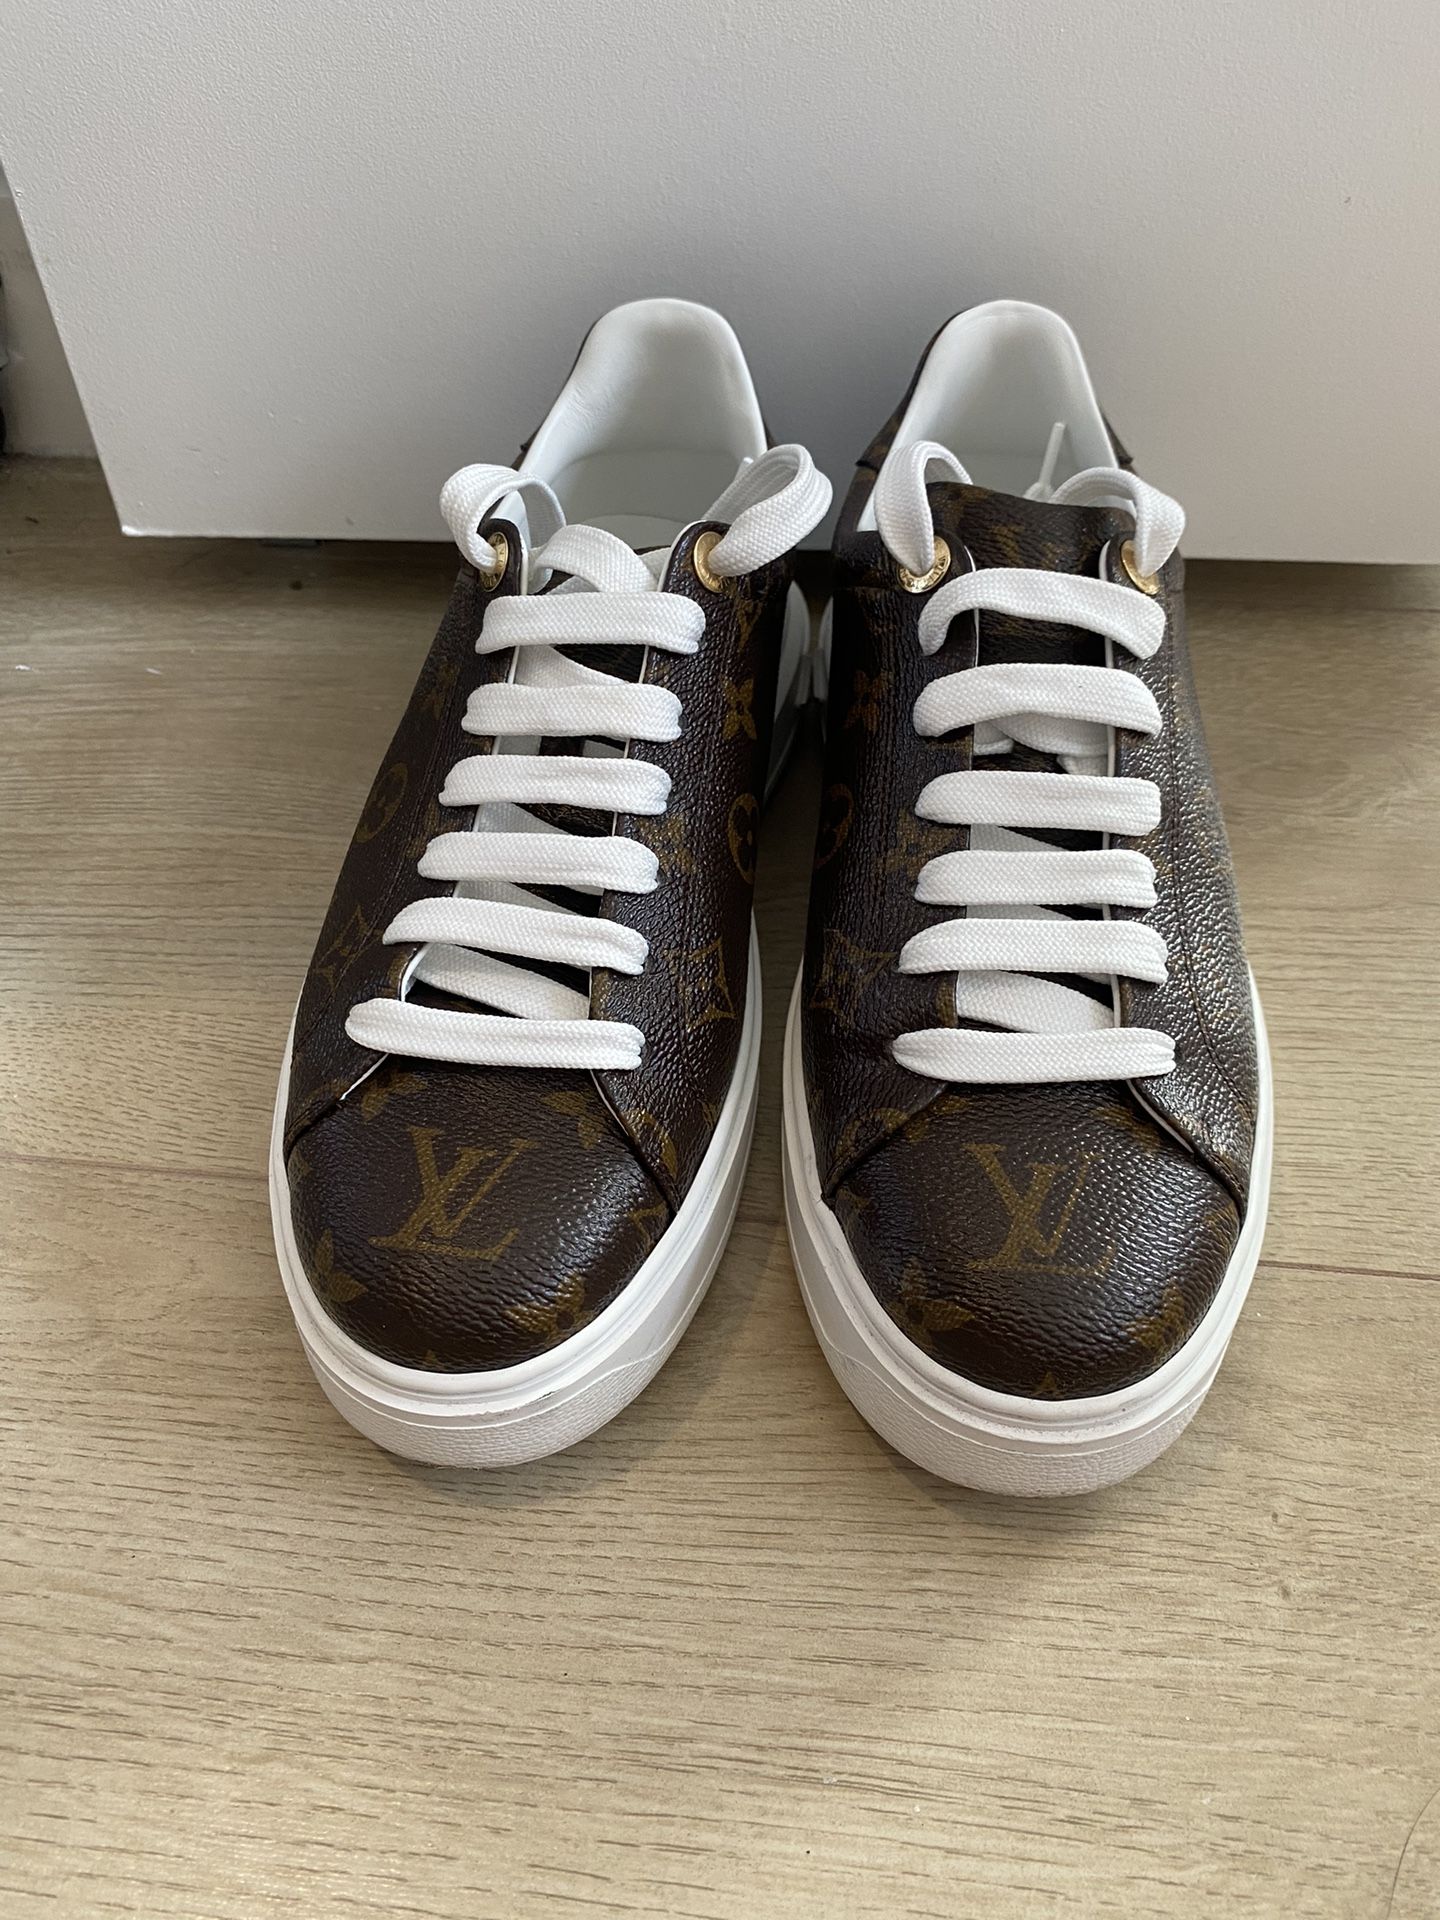 LV Sneakers Shoes for Sale in Miami Beach, FL - OfferUp